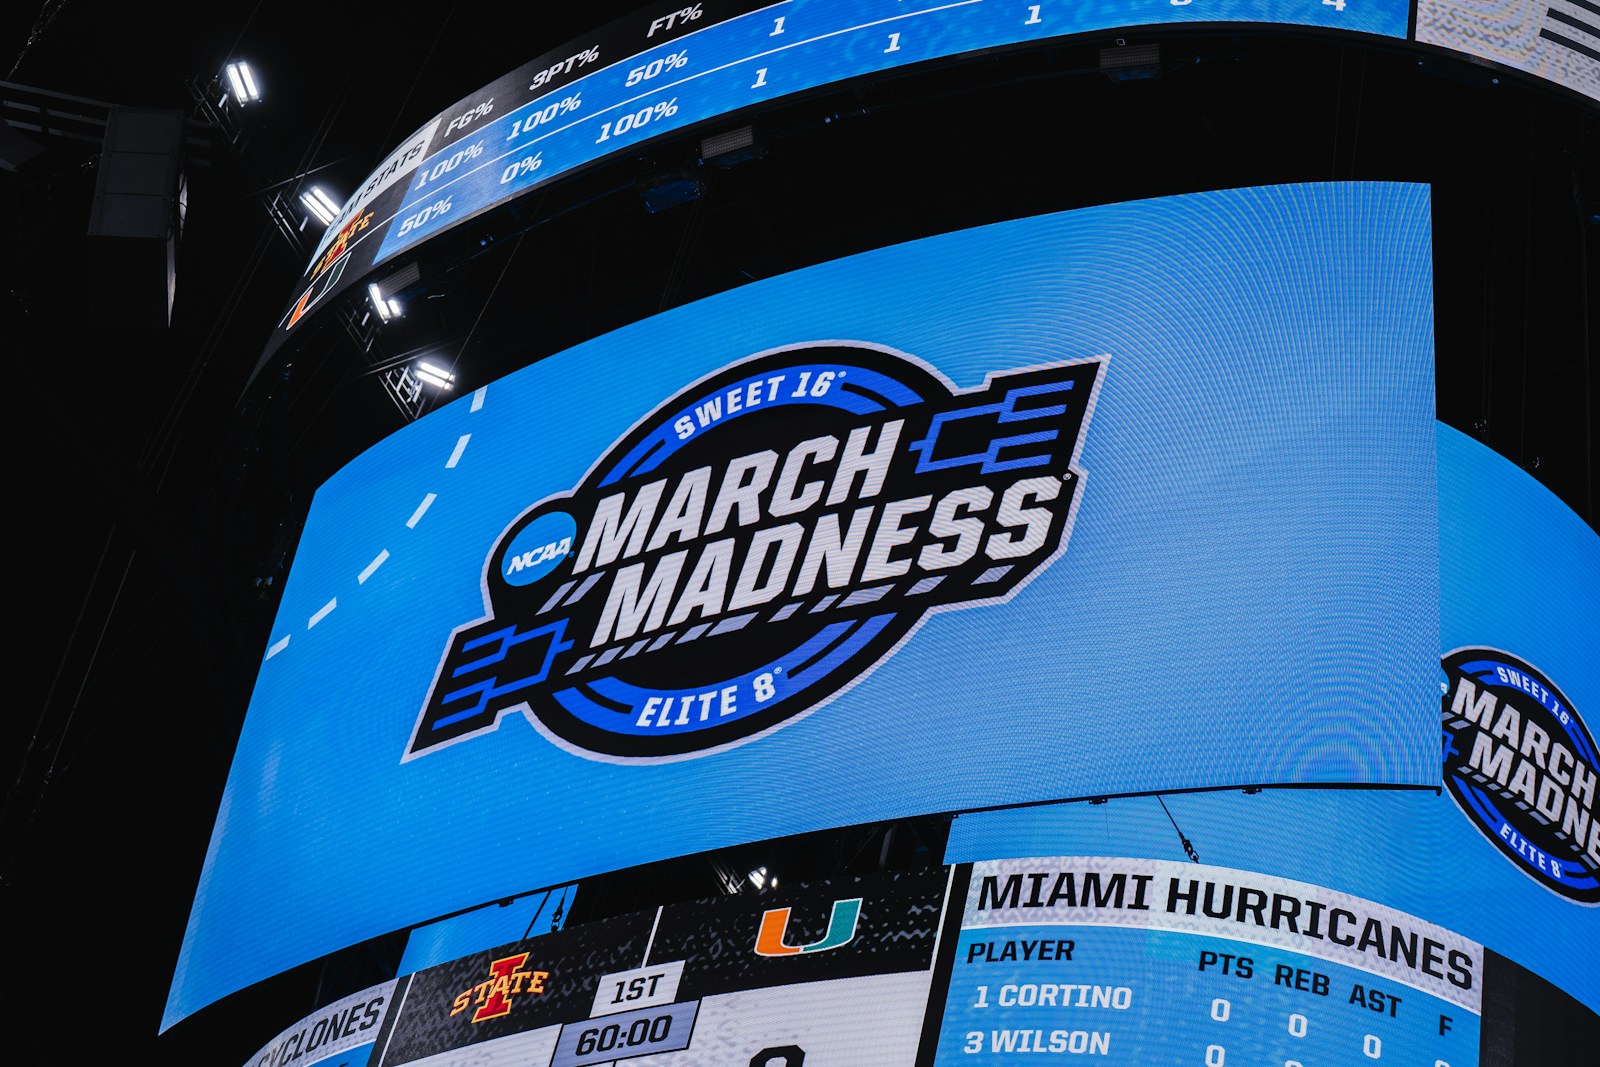 the march madness logo is displayed on the side of a building